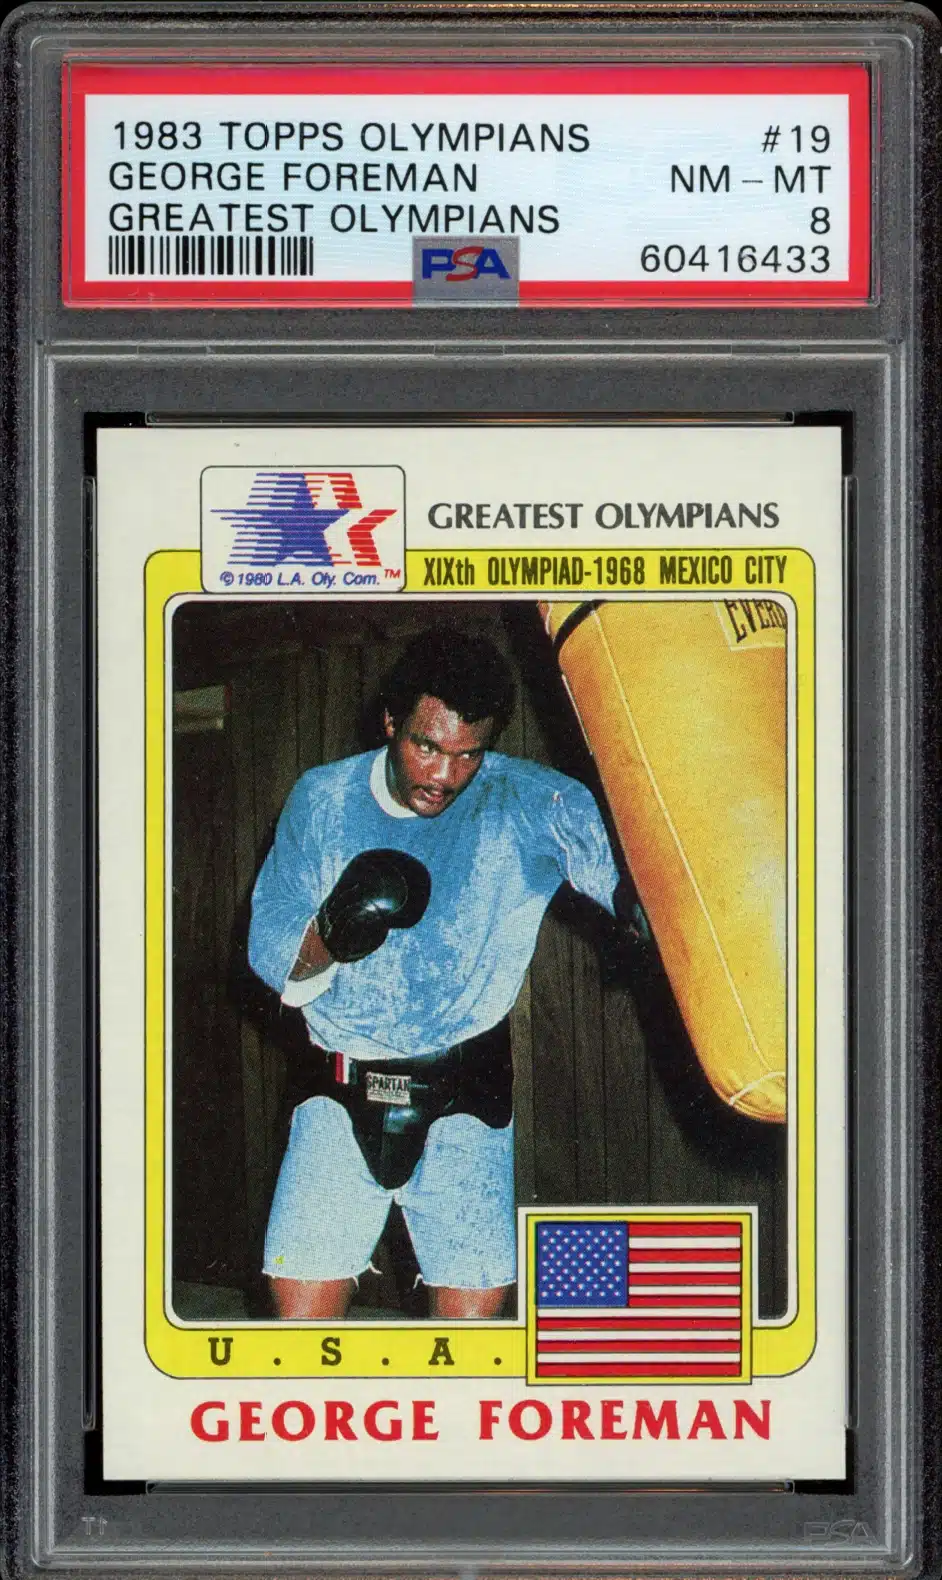 1983 Topps Olympians George Foreman Greatest Olympians #19 (PSA 8) (Front)